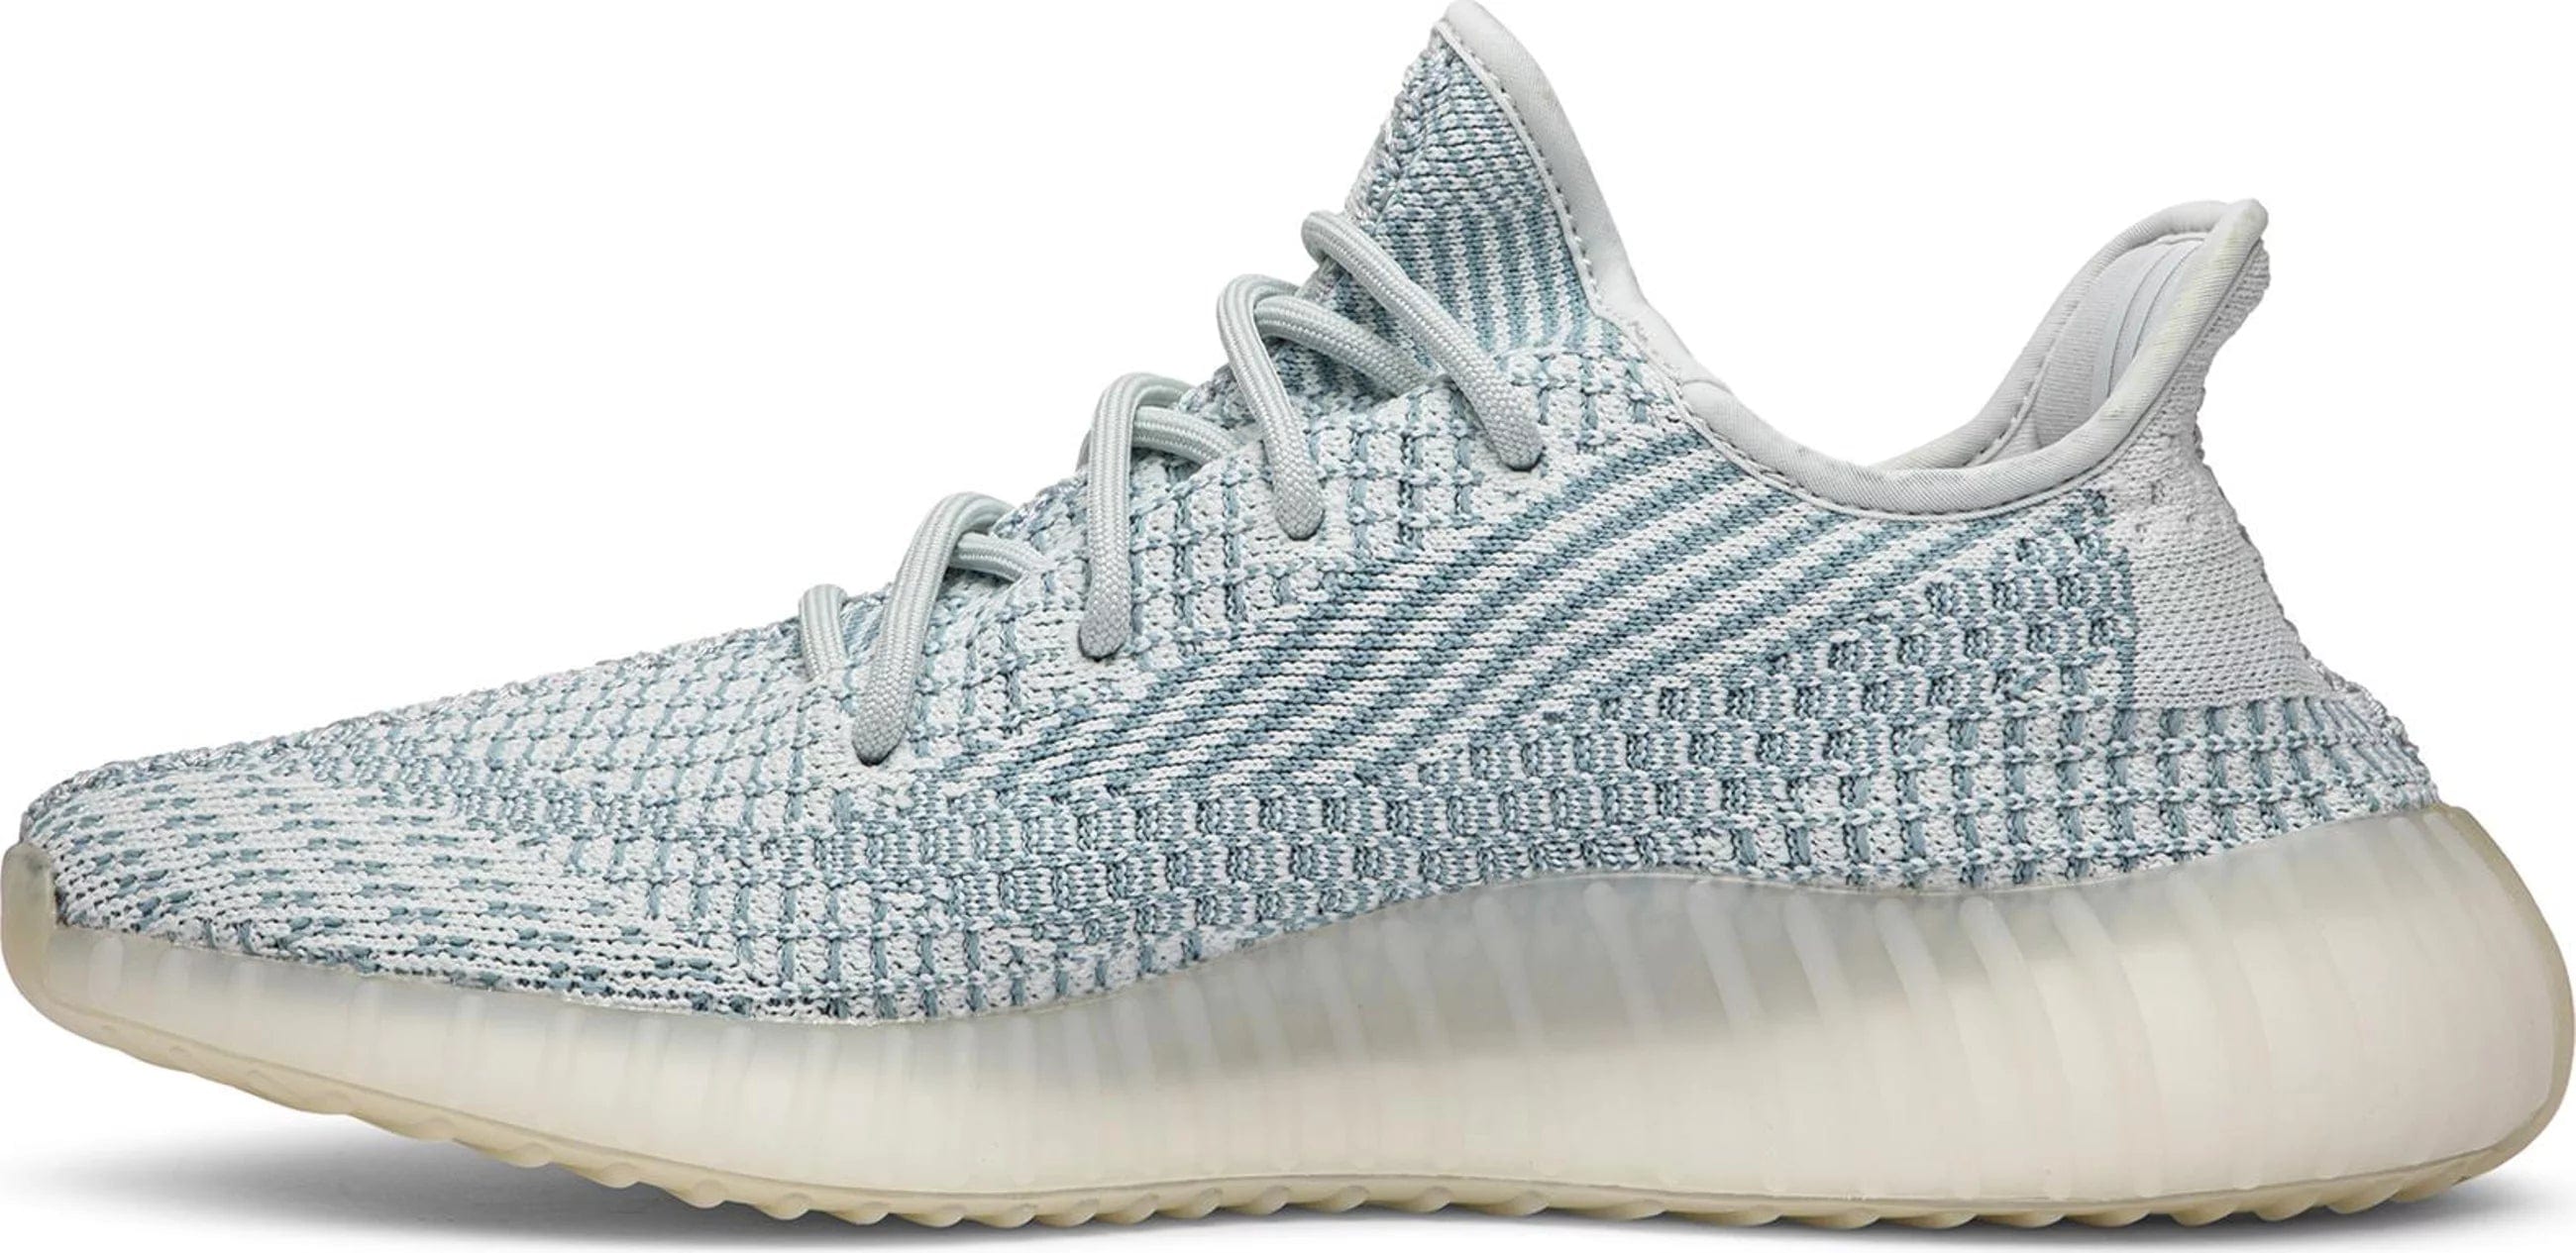 sneakers Adidas Yeezy Boost 350 V2 Cloud White Non-Reflective